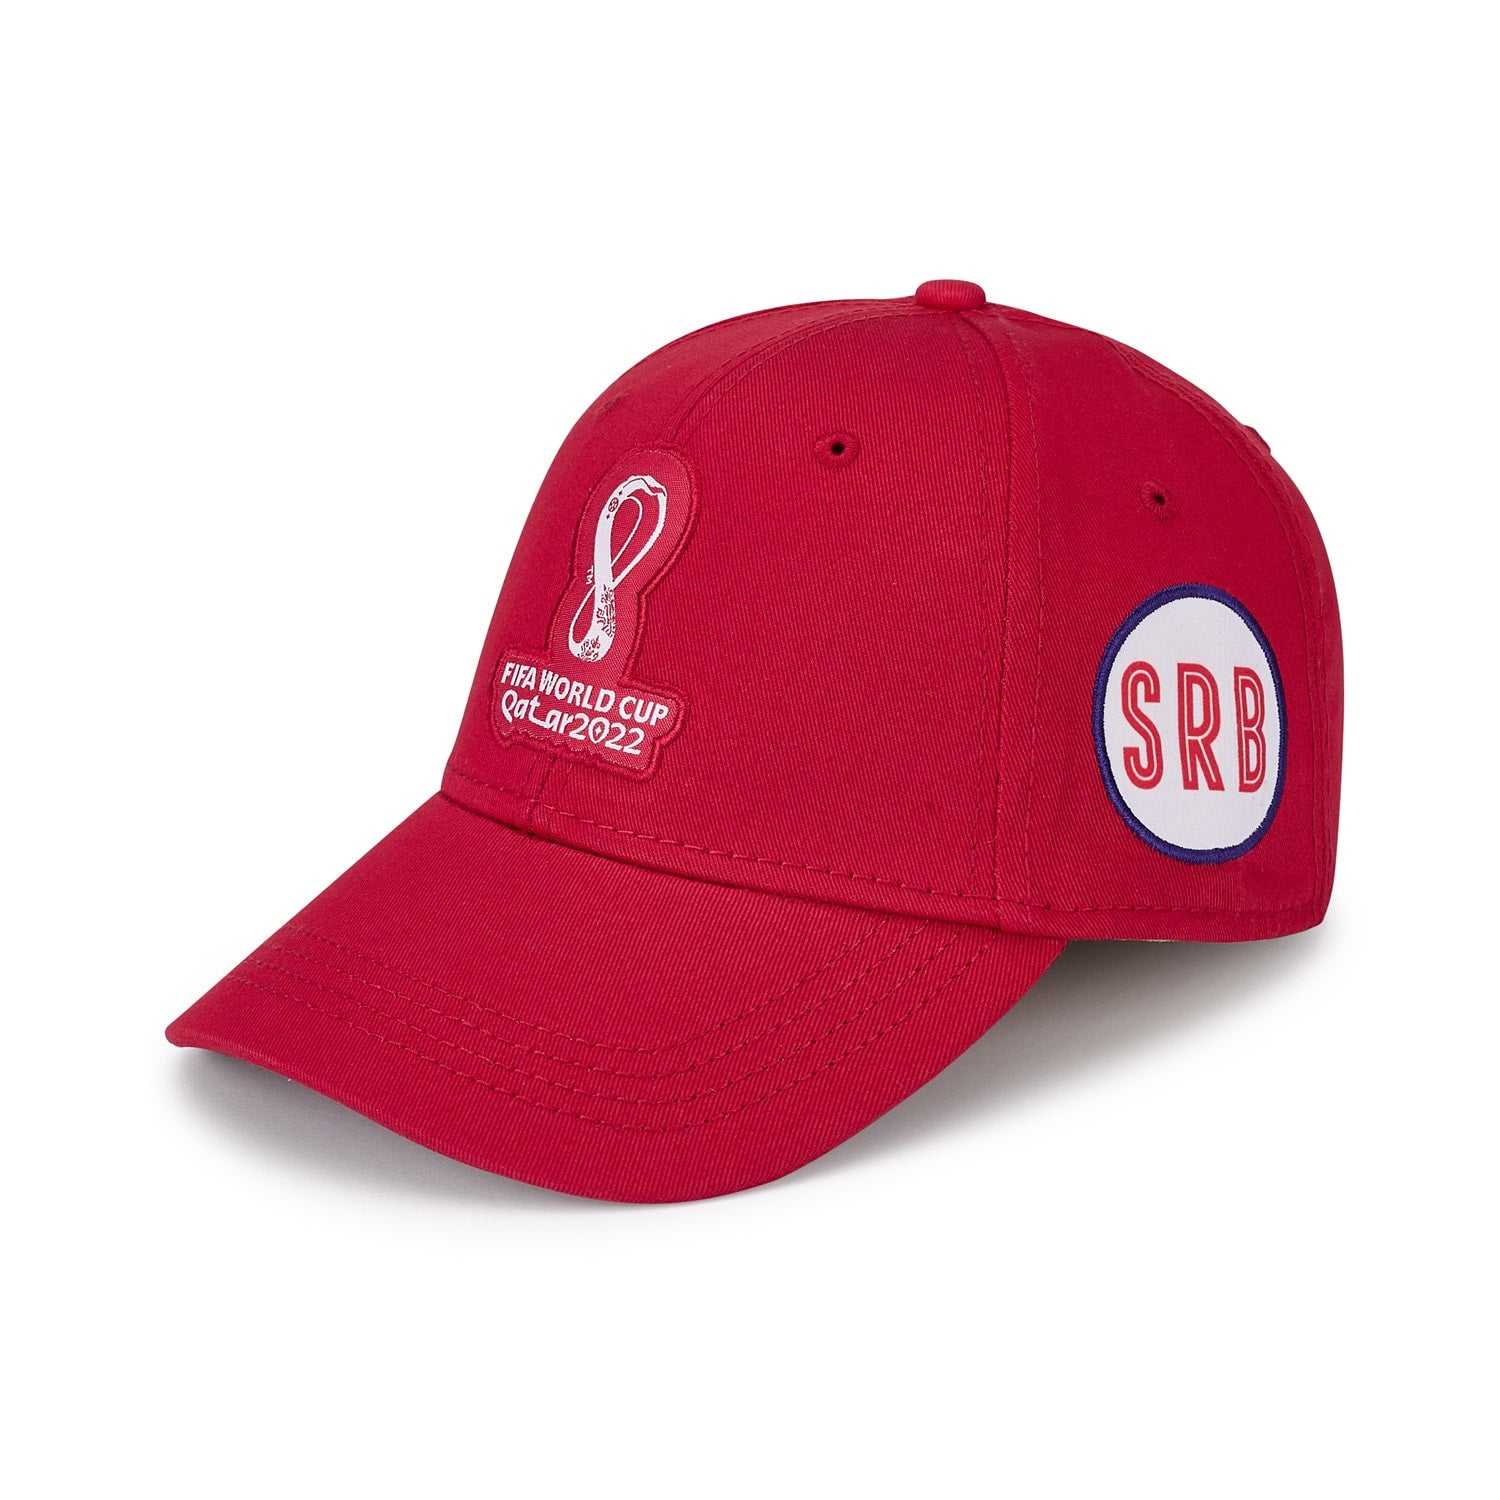 2022 World Cup Serbia Red Cap - Men's